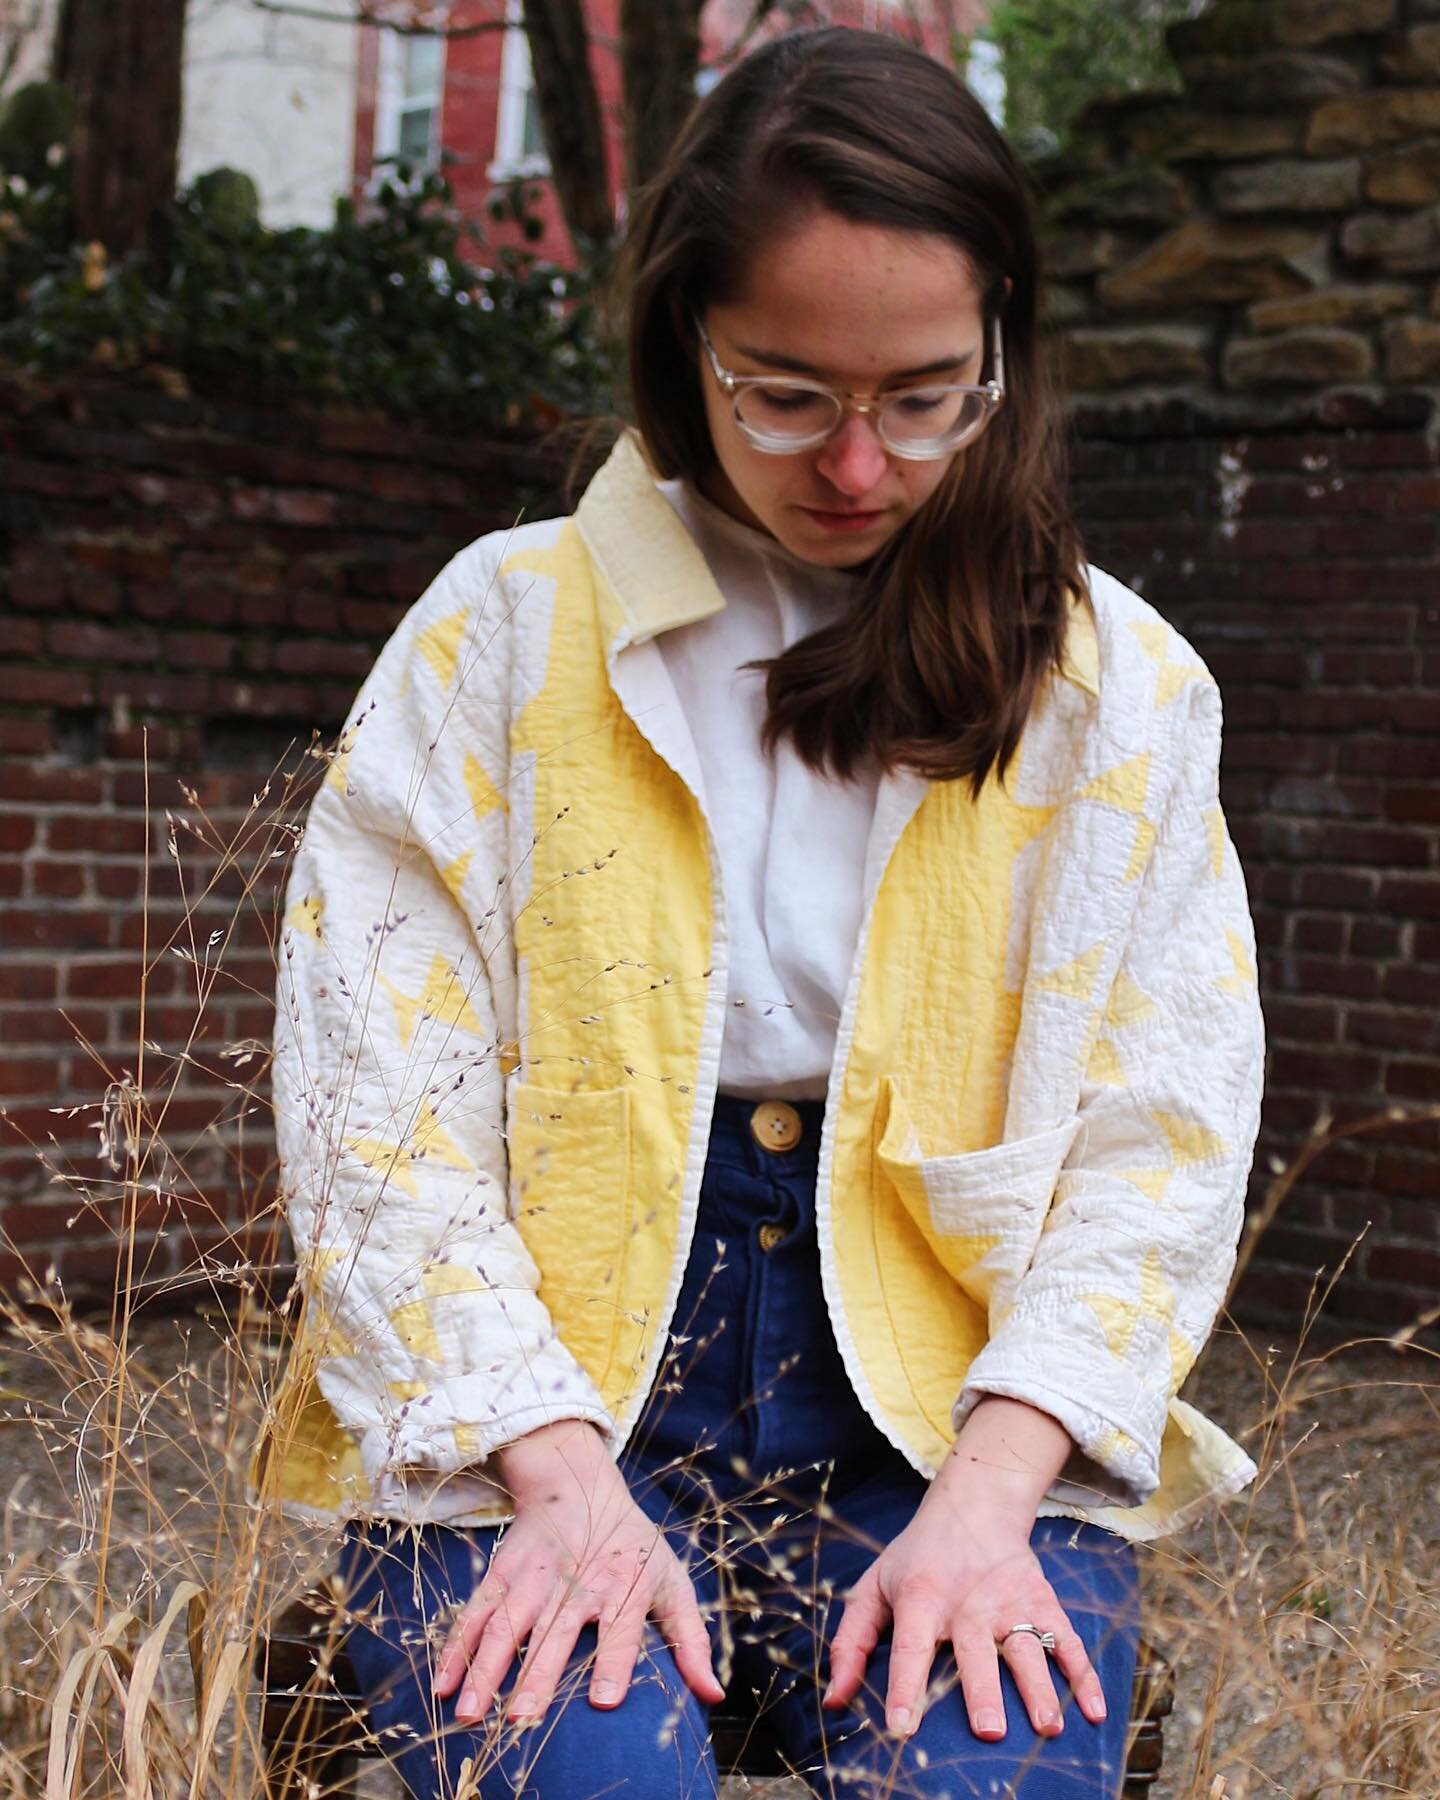 heard the temperature is dropping into the 40&rsquo;s tonight in Pittsburgh, which means it&rsquo;s quilt coat weather! the #allwellcardigancoat pattern is perfect for making all sorts of layers &mdash; from light linen popovers to boiled wool cardig